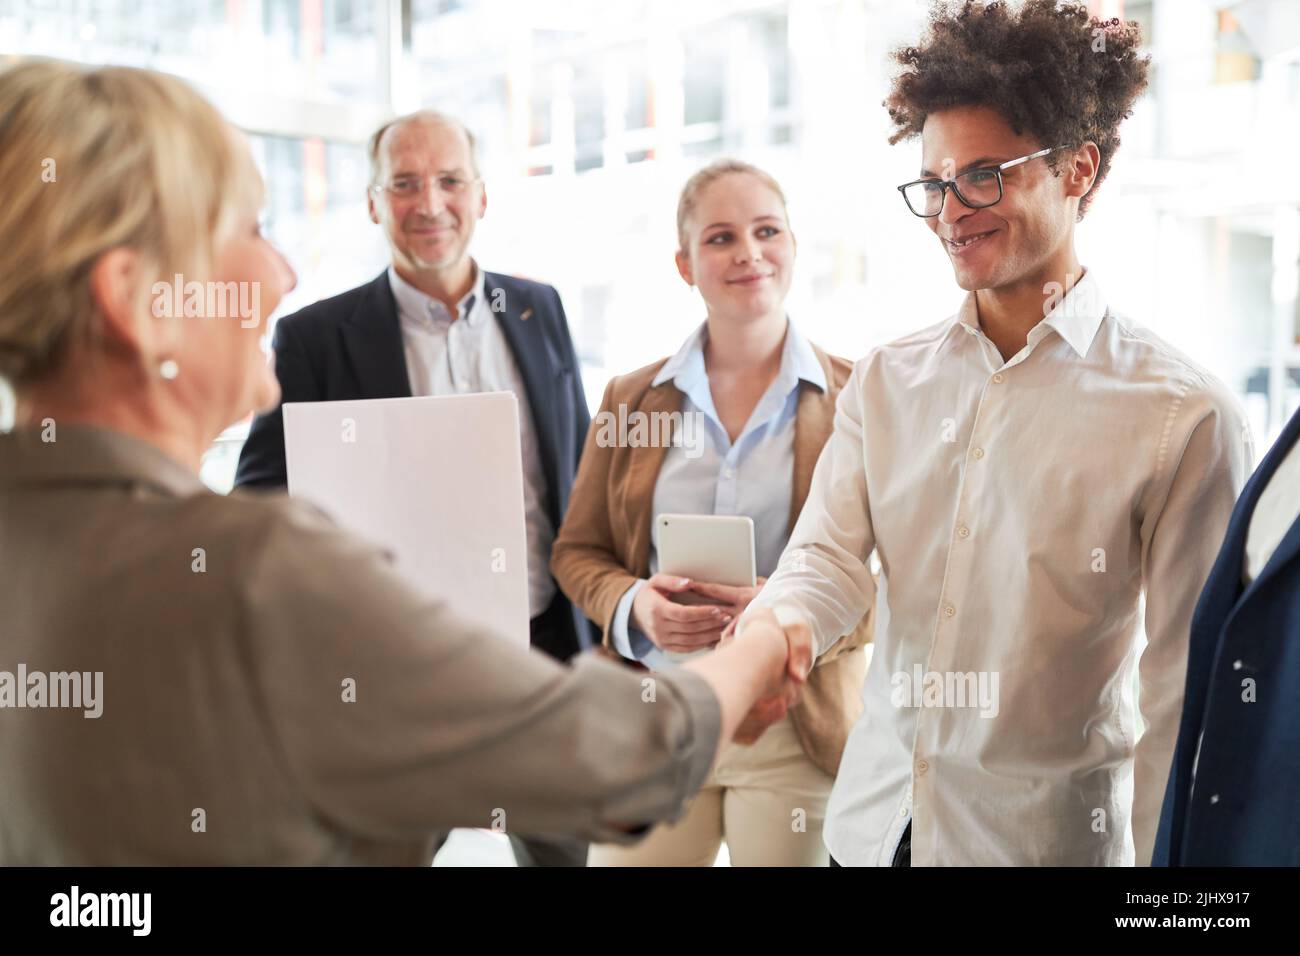 Start-up founder and business woman shaking hands for partnership or greeting Stock Photo